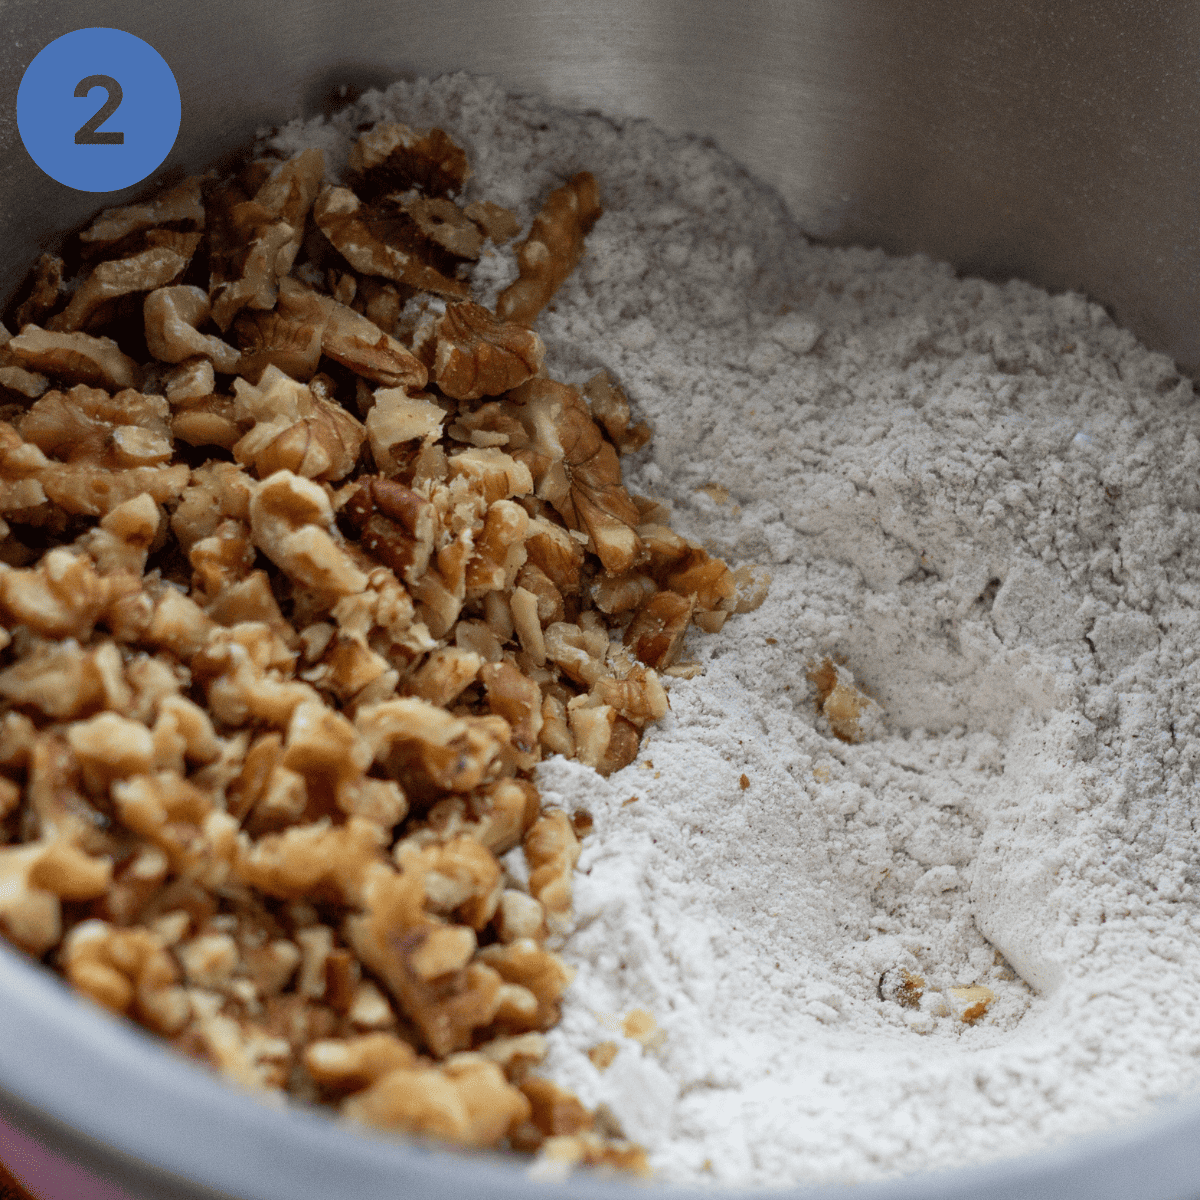 Mixing nuts and flour in a mixing bowl.